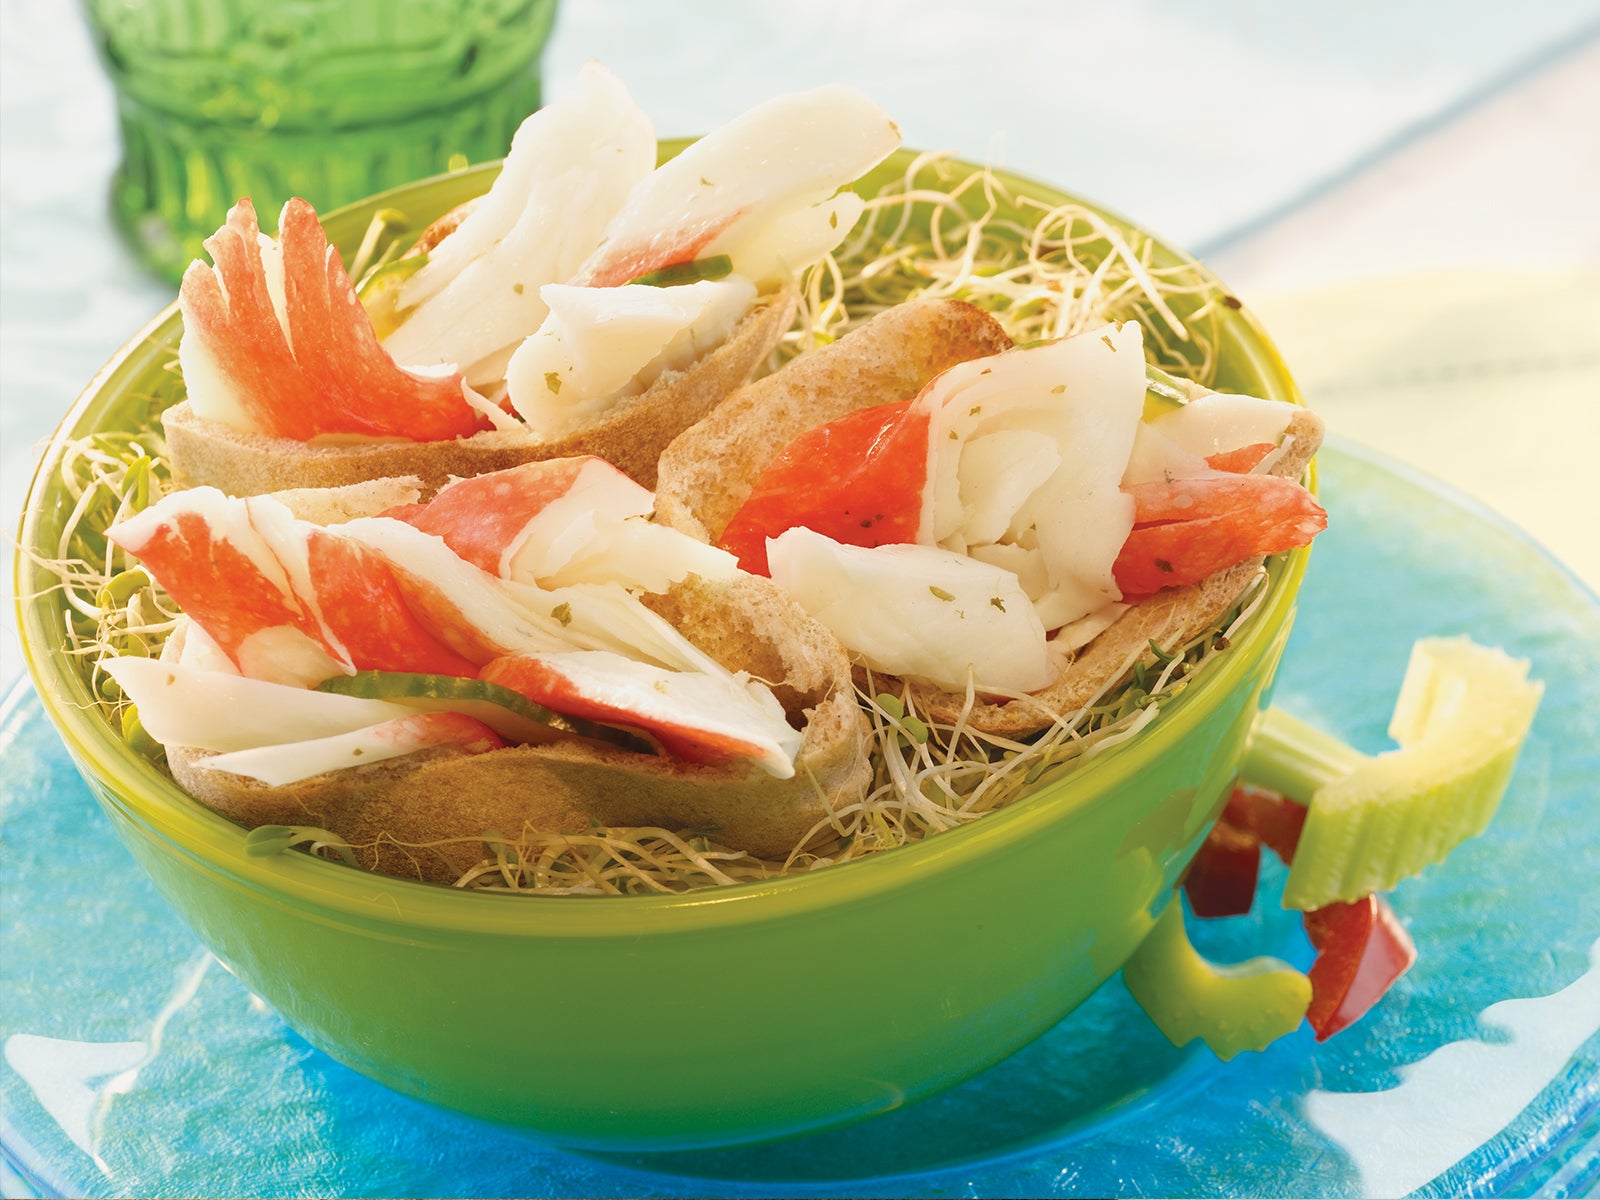 LEG-A-SEA® Flake Style Surimi Seafood w/ Repack Labels Packaging